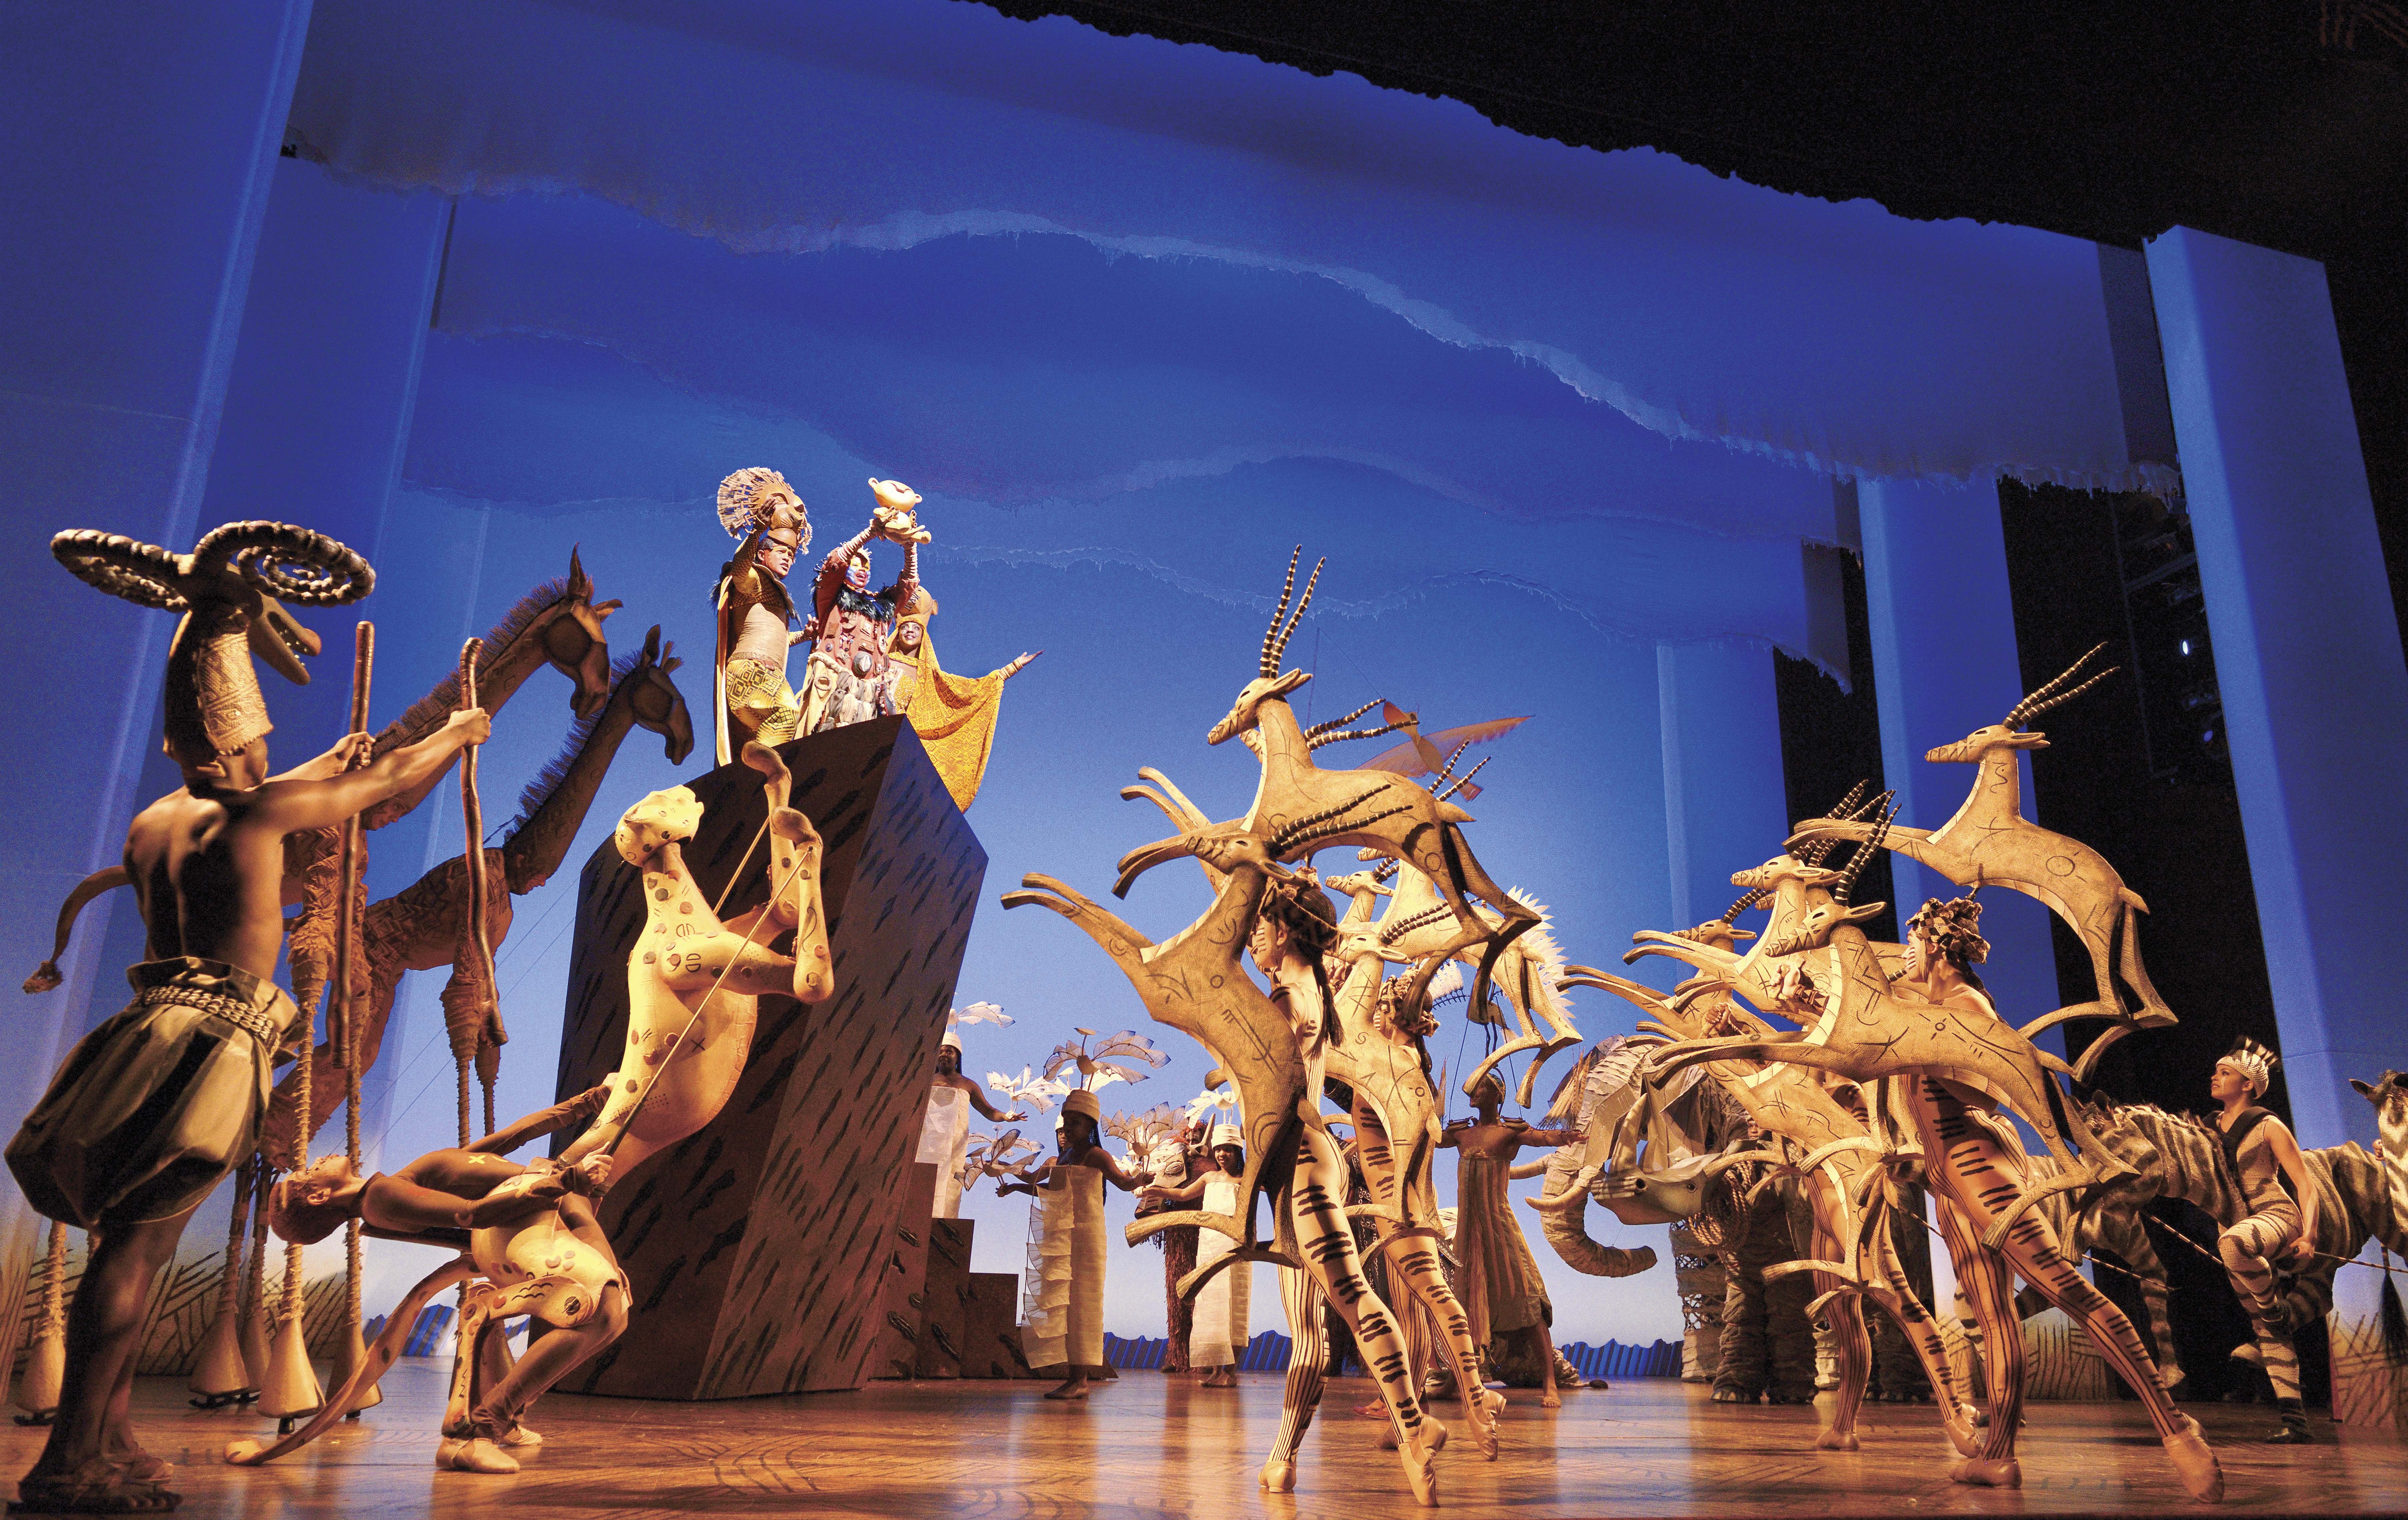 Amazing puppets in the Lion King